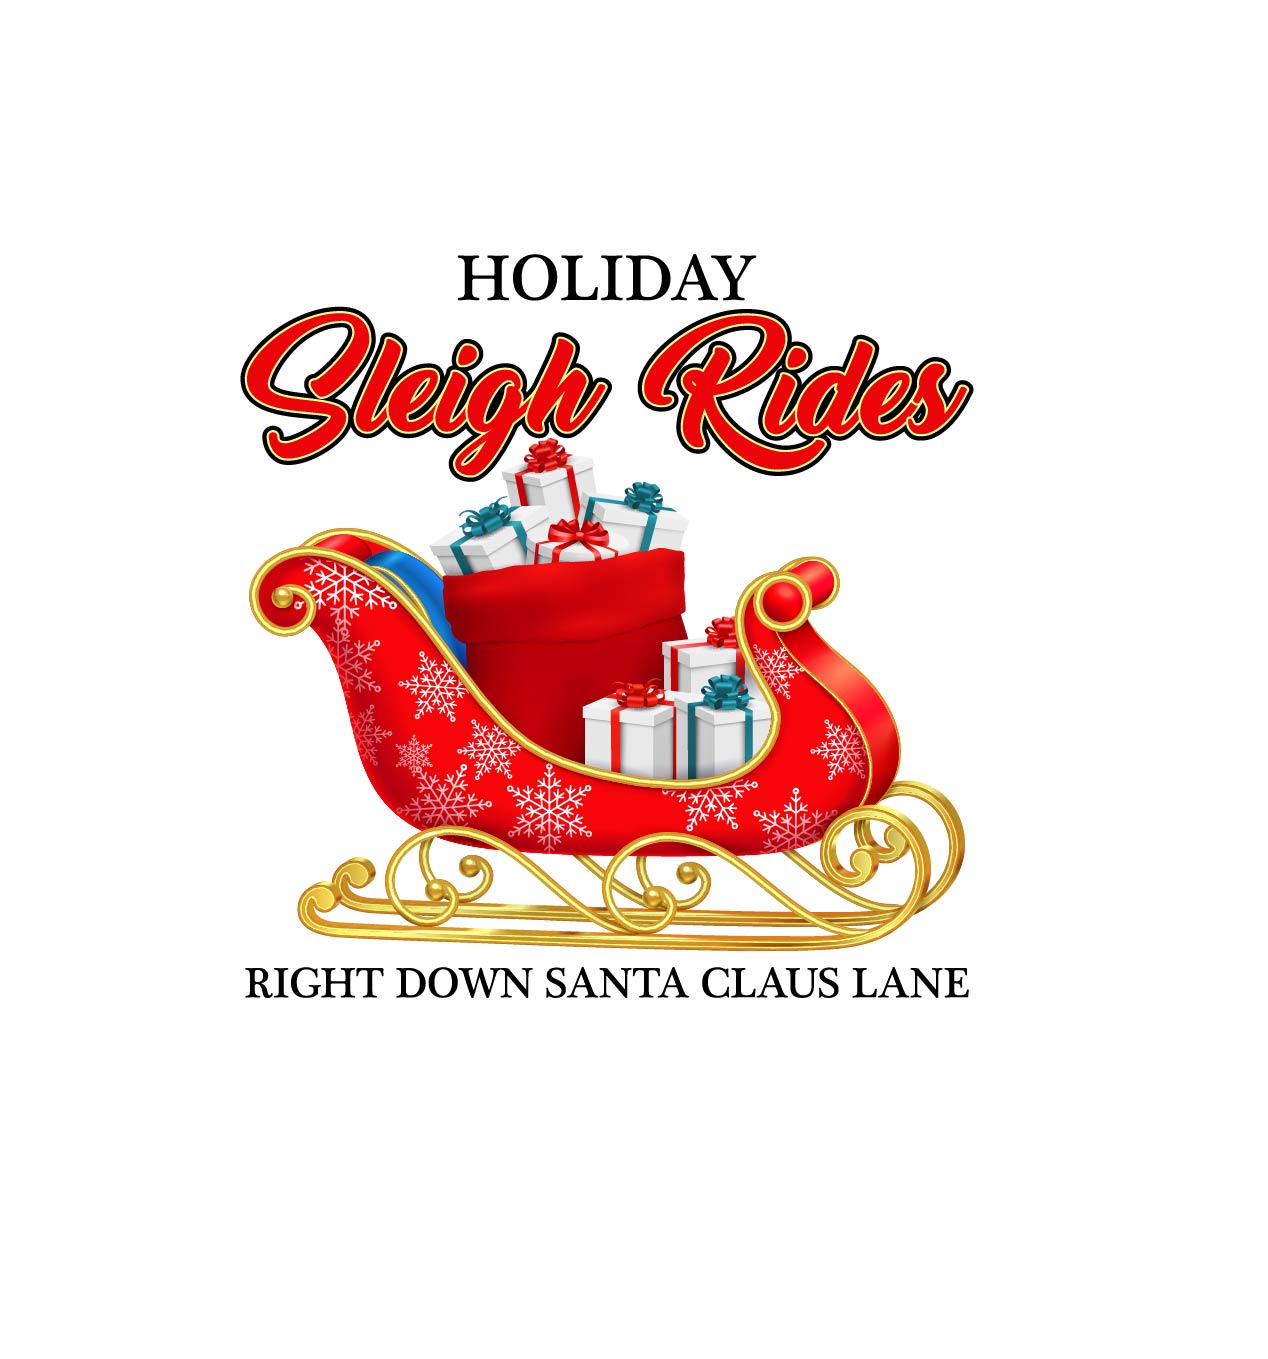 HOLIDAY SLEIGH RIDER - XMS - 244